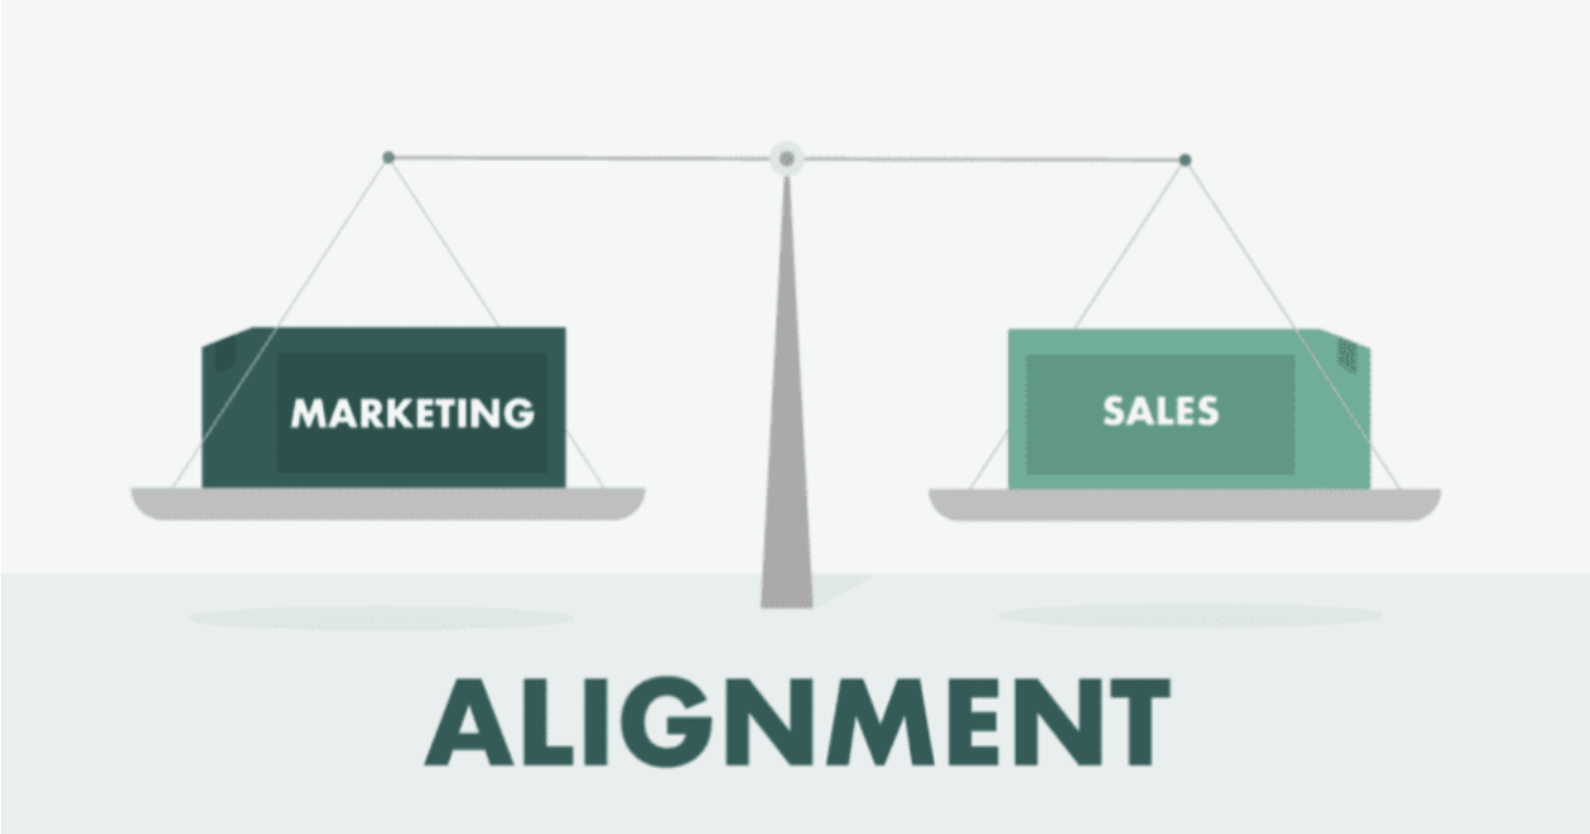 alignment with marketing and sales